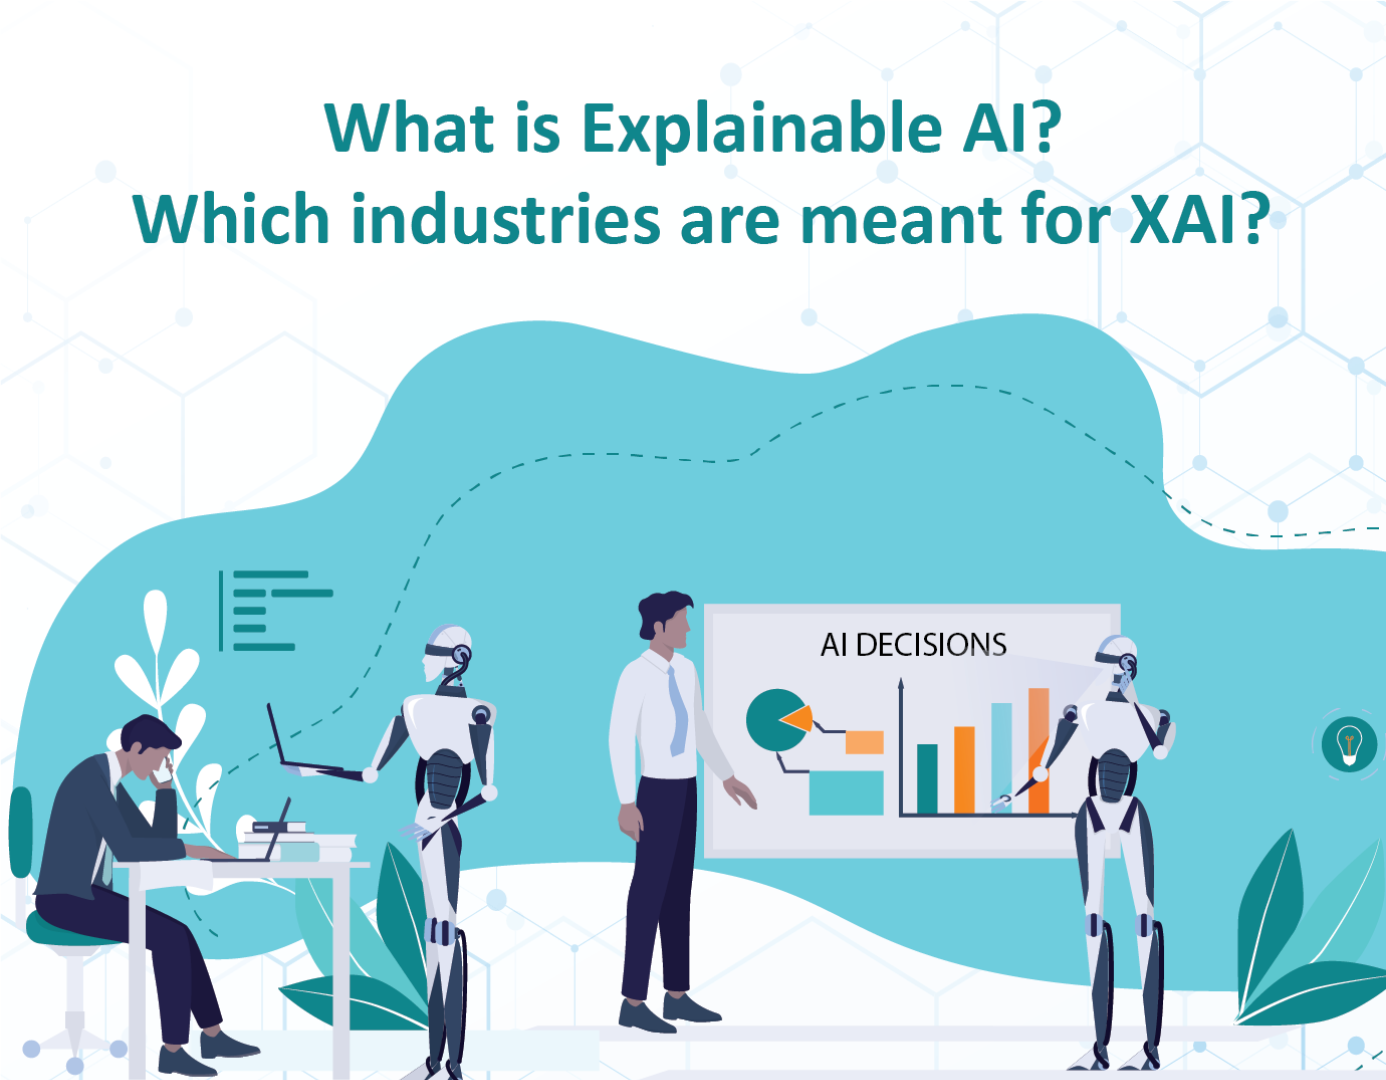 Visual representation highlighting the application and significance of Explainable AI (XAI) in crucial sectors like healthcare, manufacturing, and autonomous vehicles.